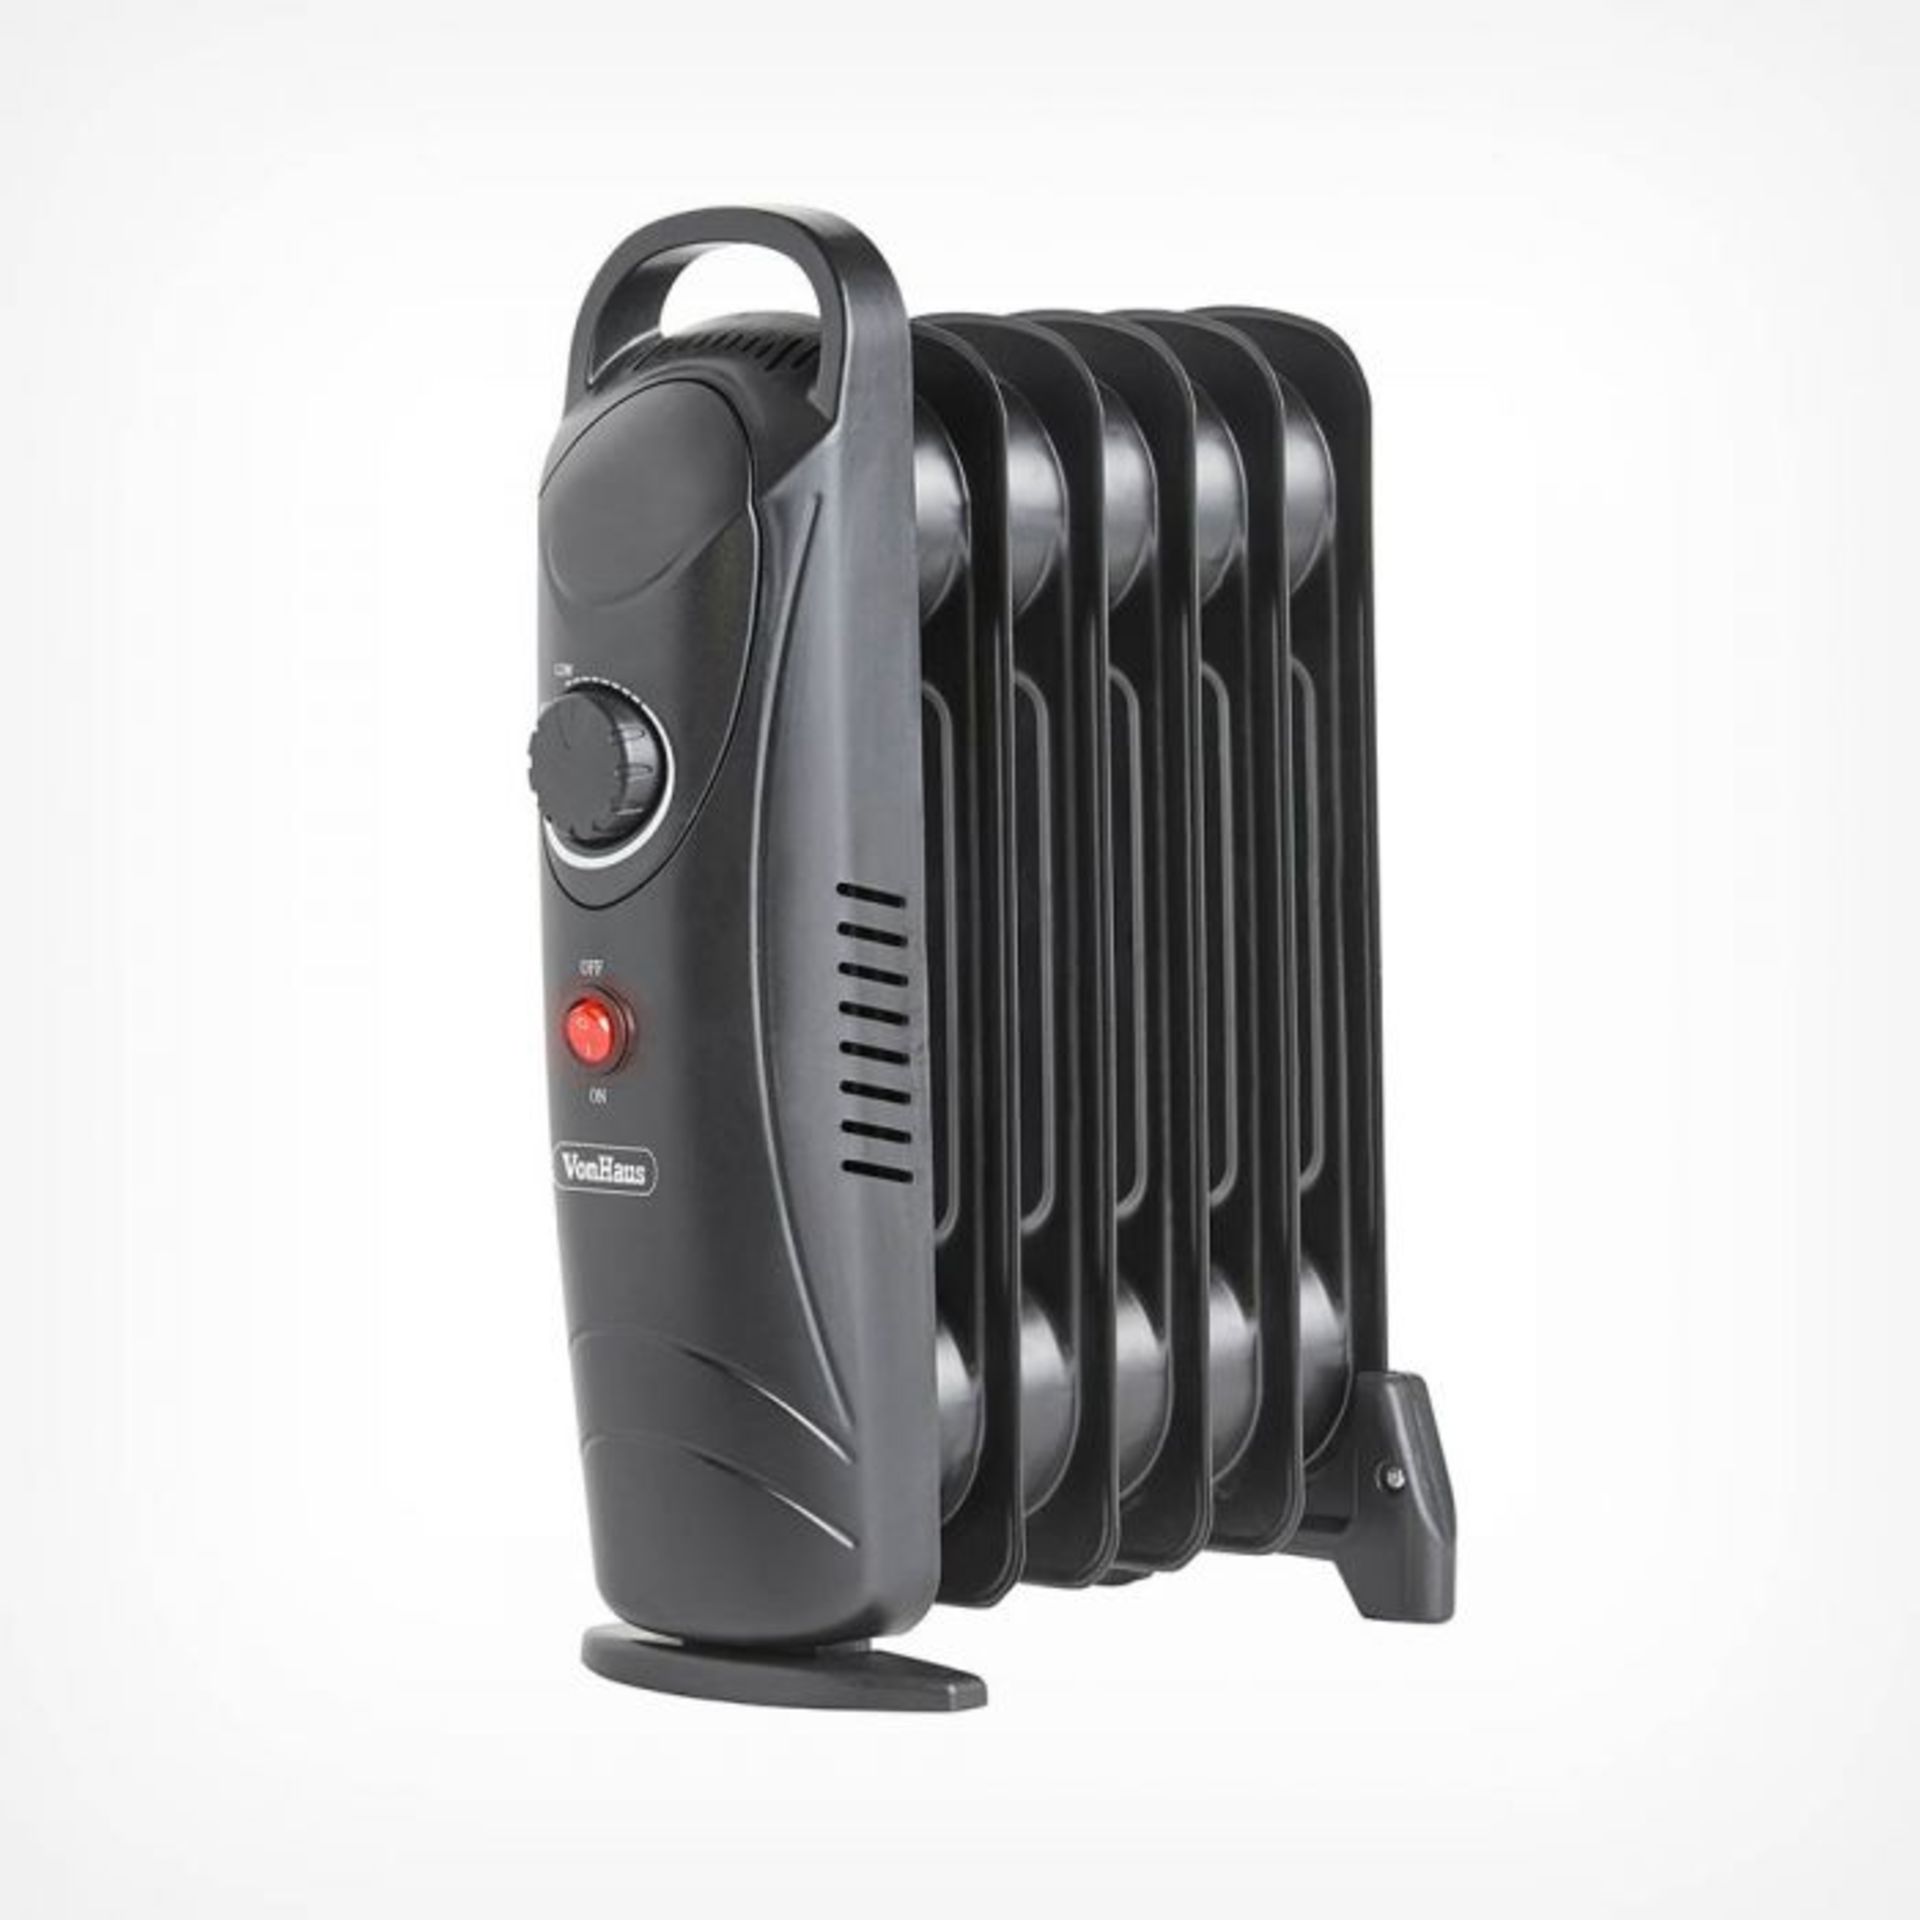 (NN5) 6 Fin 800W Oil Filled Radiator - Black Compact yet powerful 800W radiator with 6 oil-fil... - Image 2 of 3